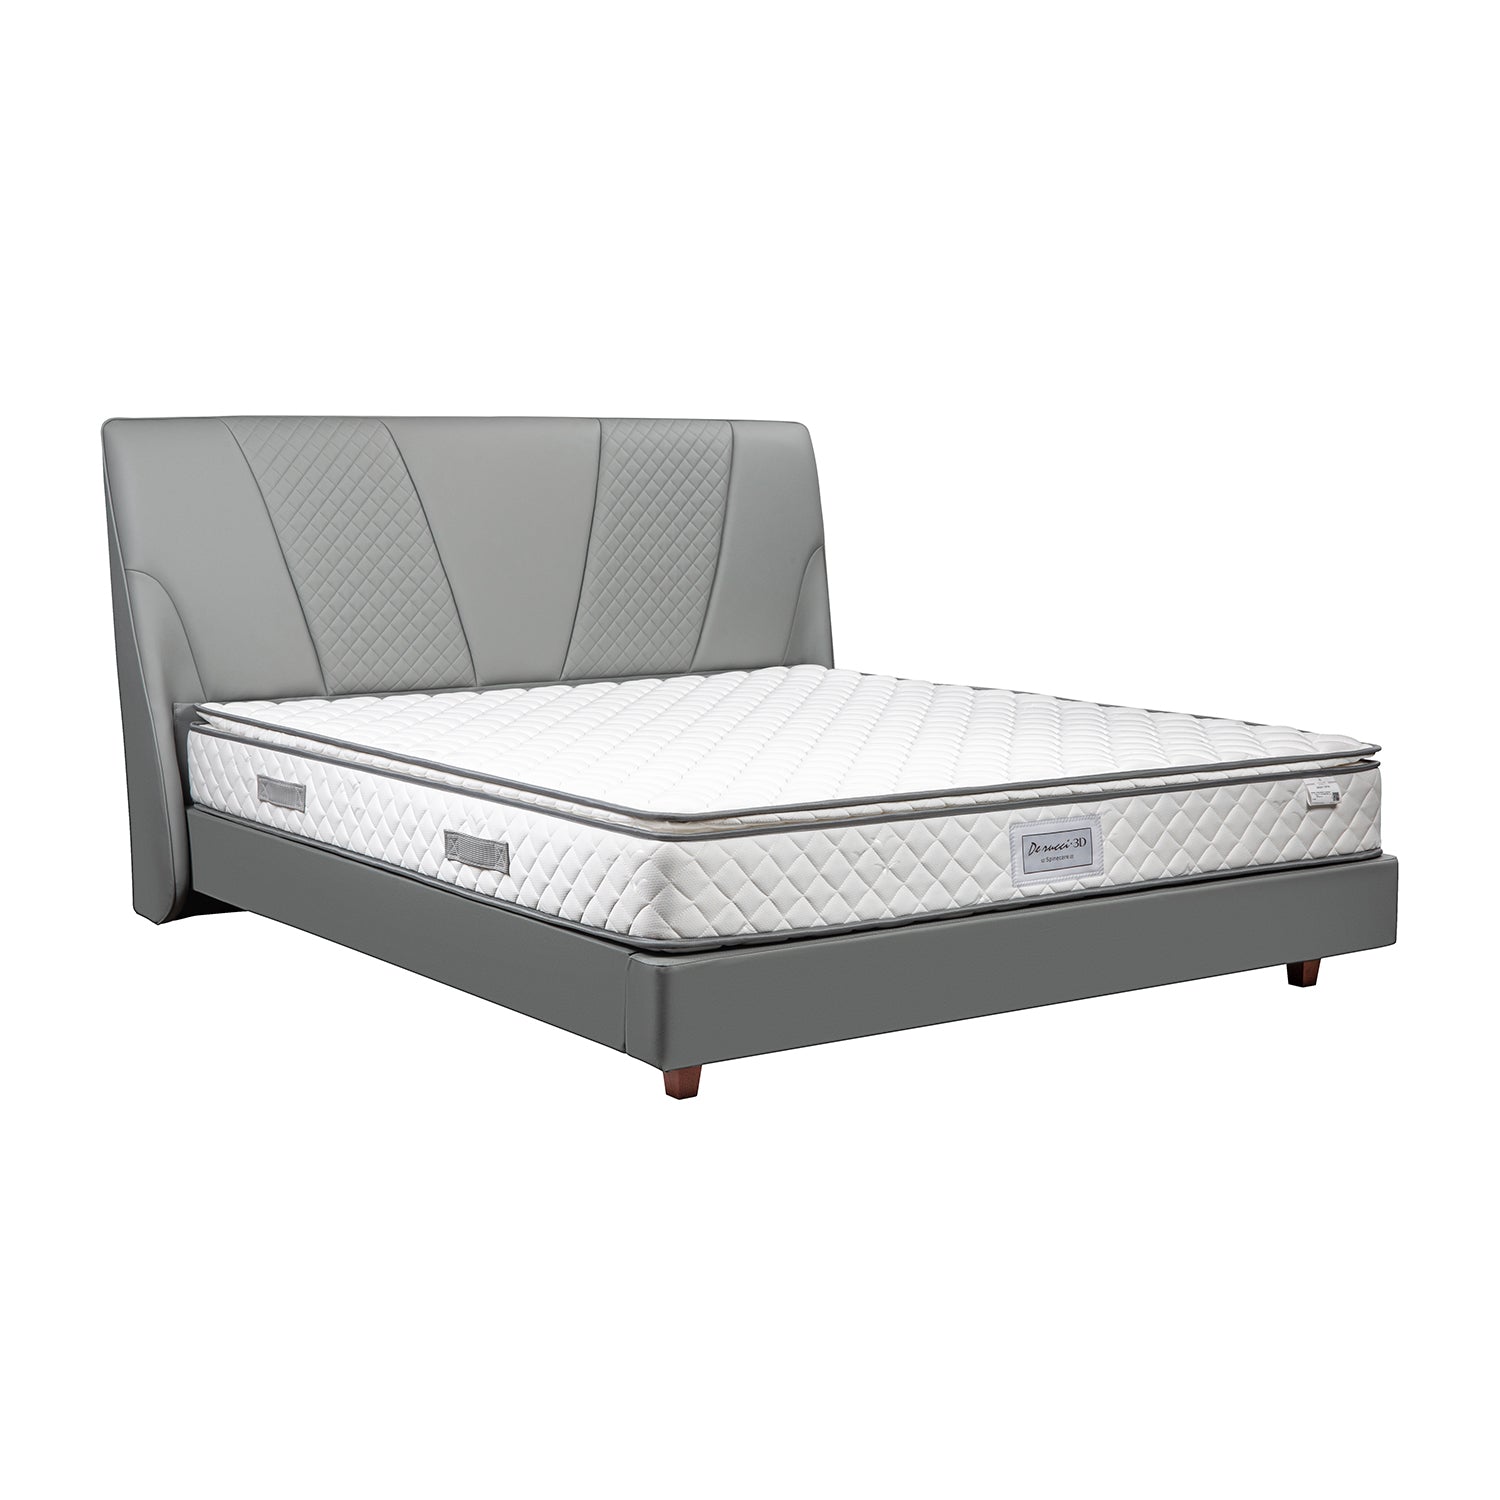 DeRUCCI Bed Frame BOC1 - 005 with grey upholstered headboard and base, paired with a white quilted mattress. Modern and sleek design for stylish bedroom.